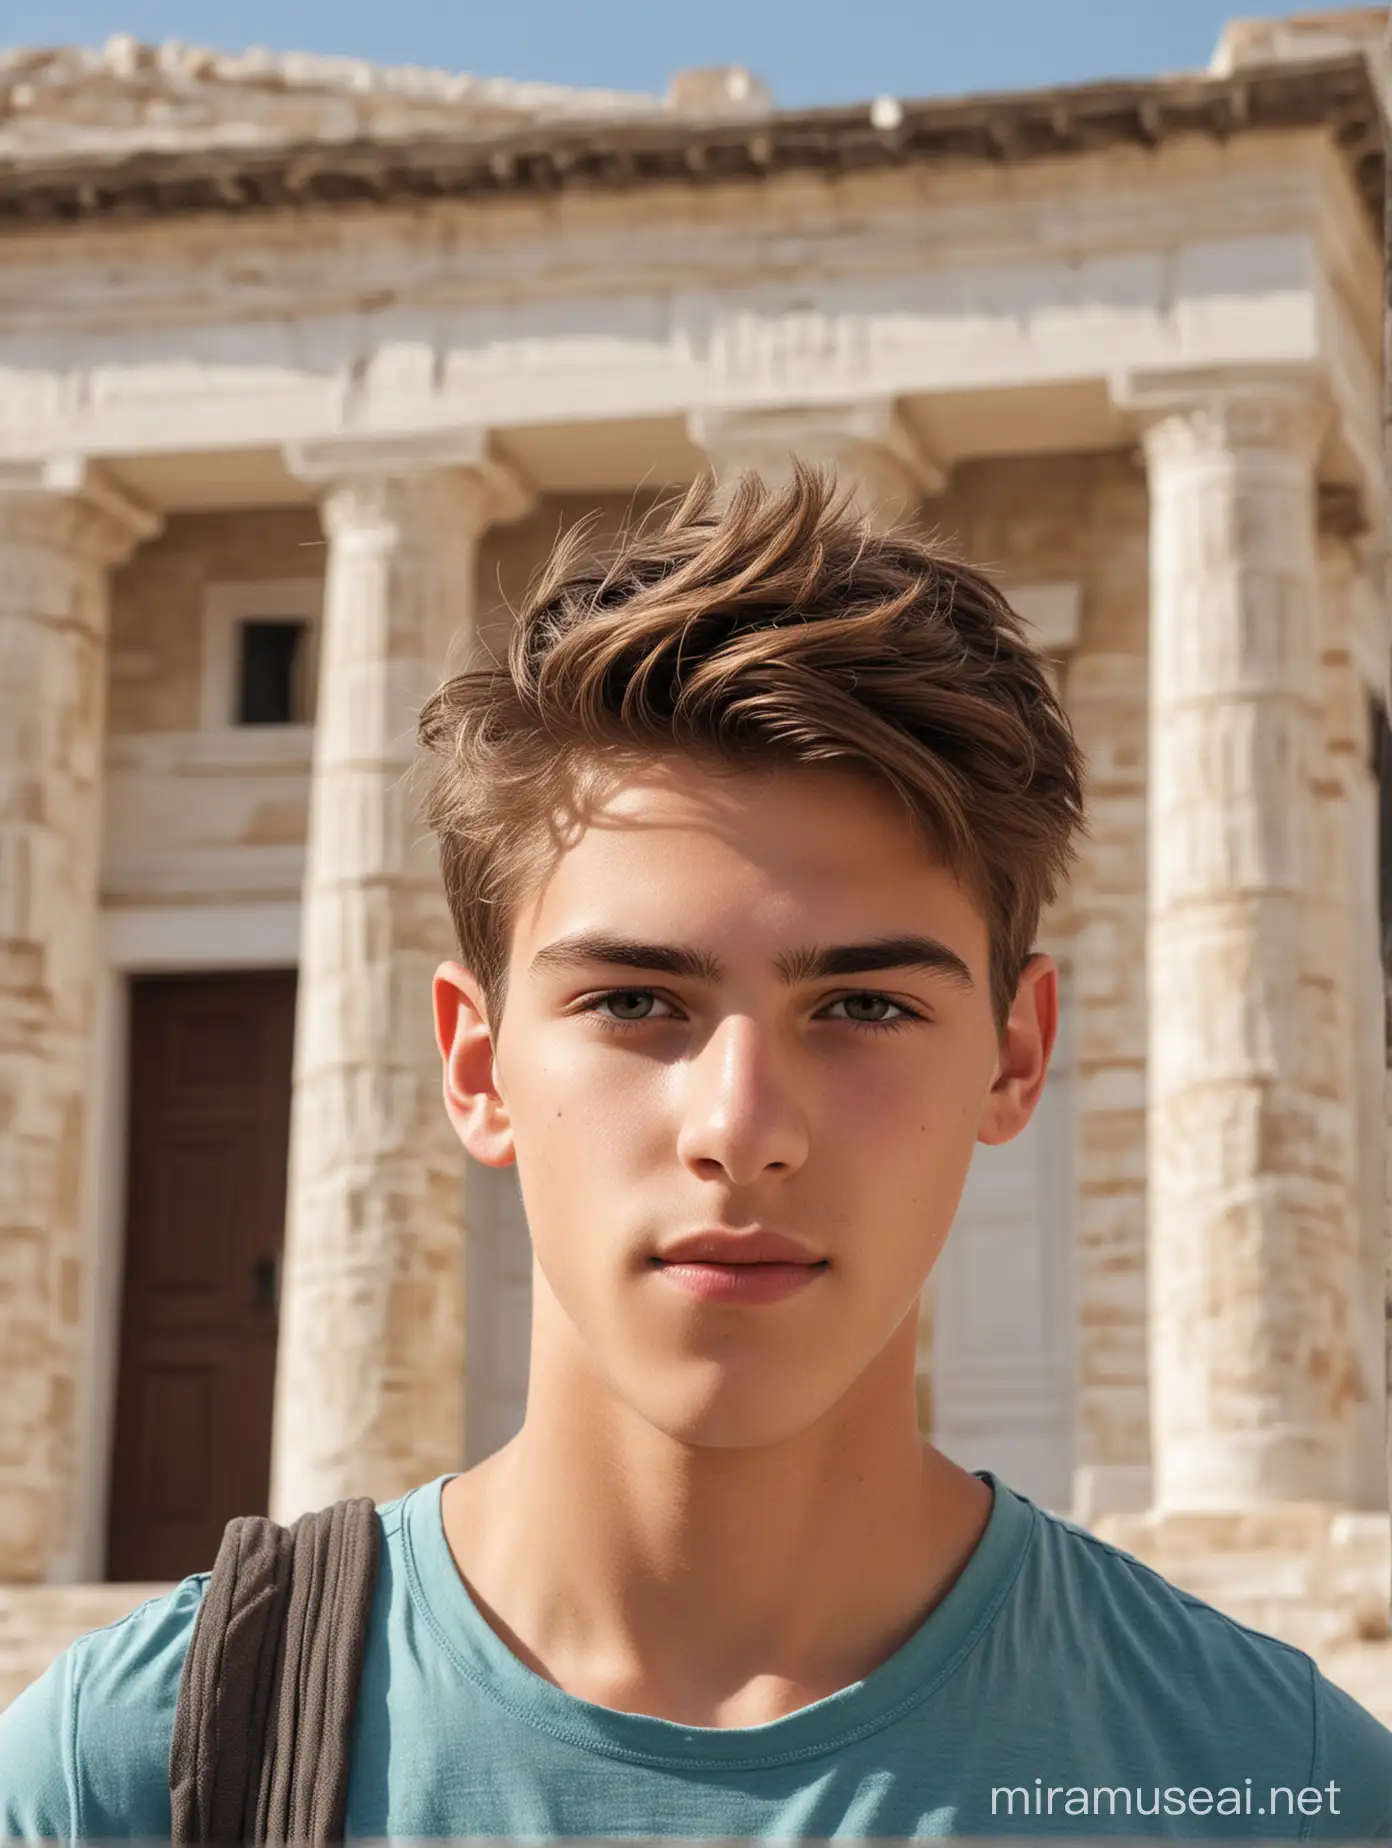 CloseUp Portrait of Charming 16YearOld Model Boy Against Greek Architectural Background